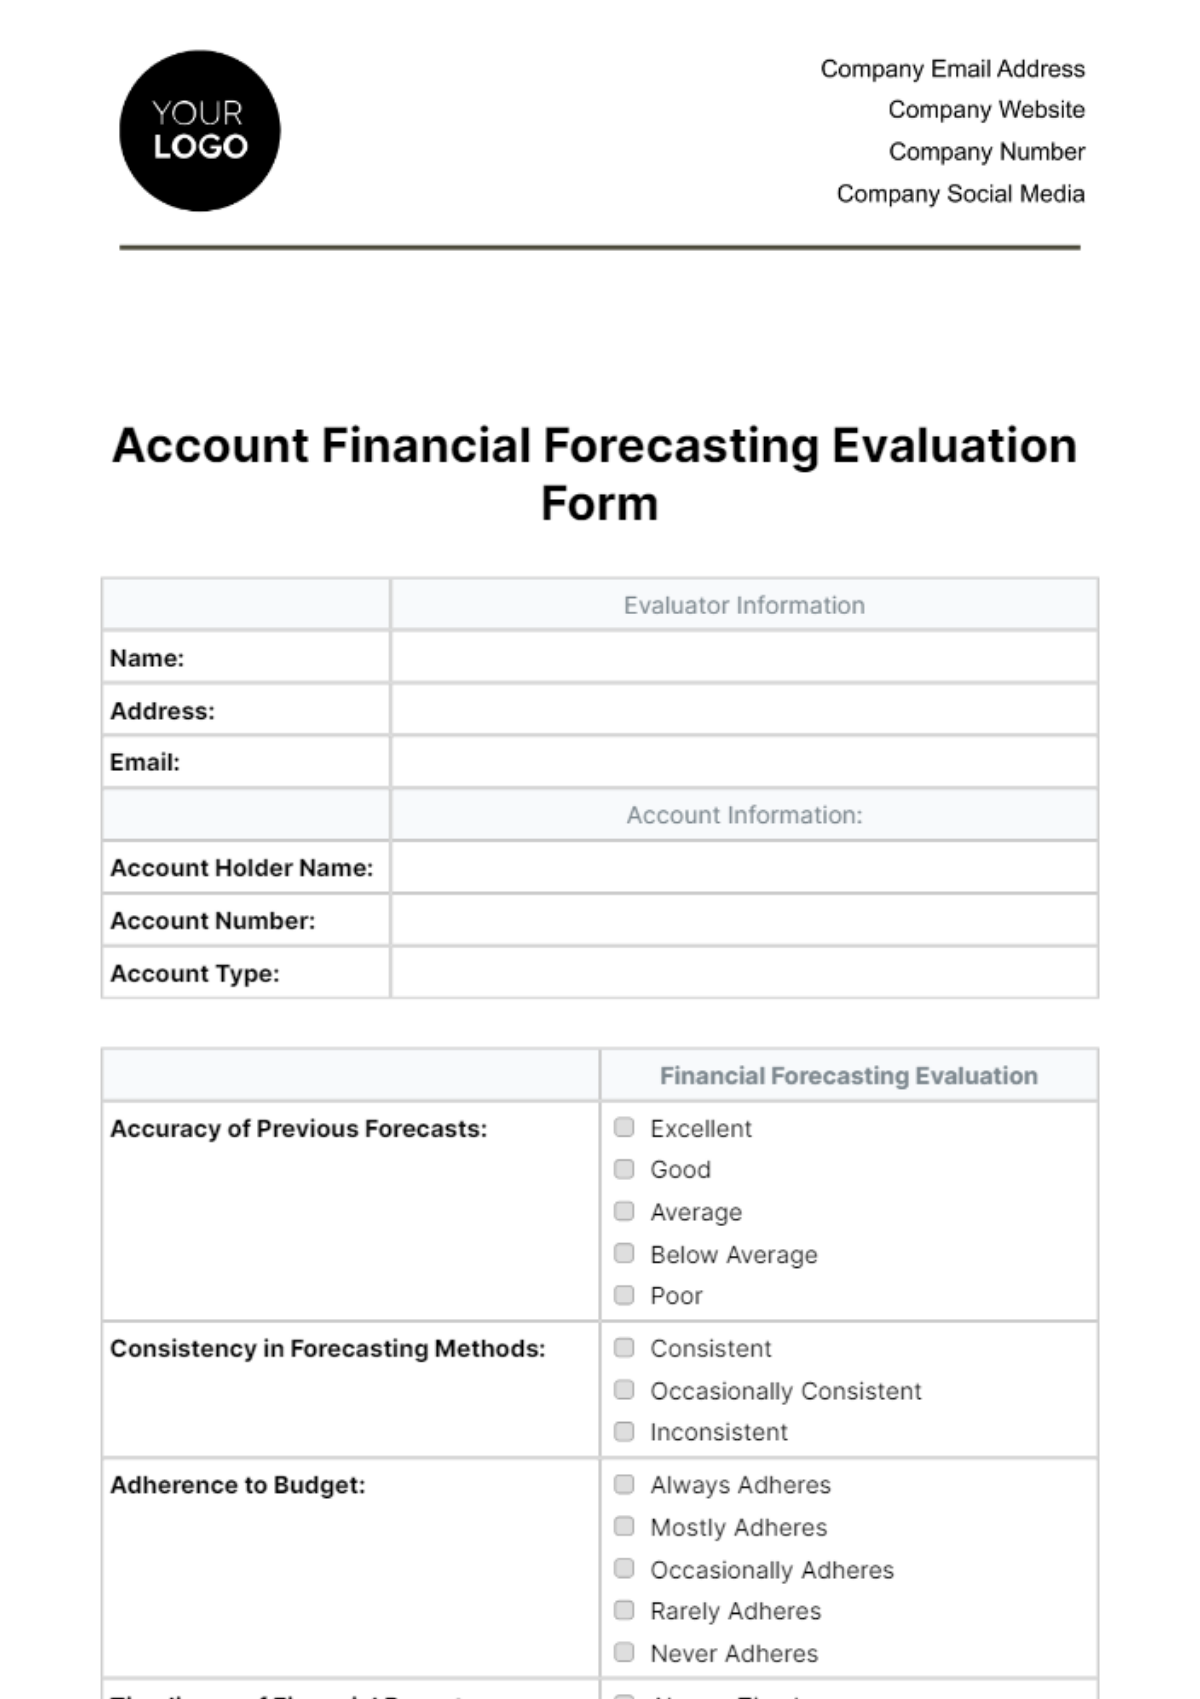 Free Account Financial Forecasting Evaluation Form Template